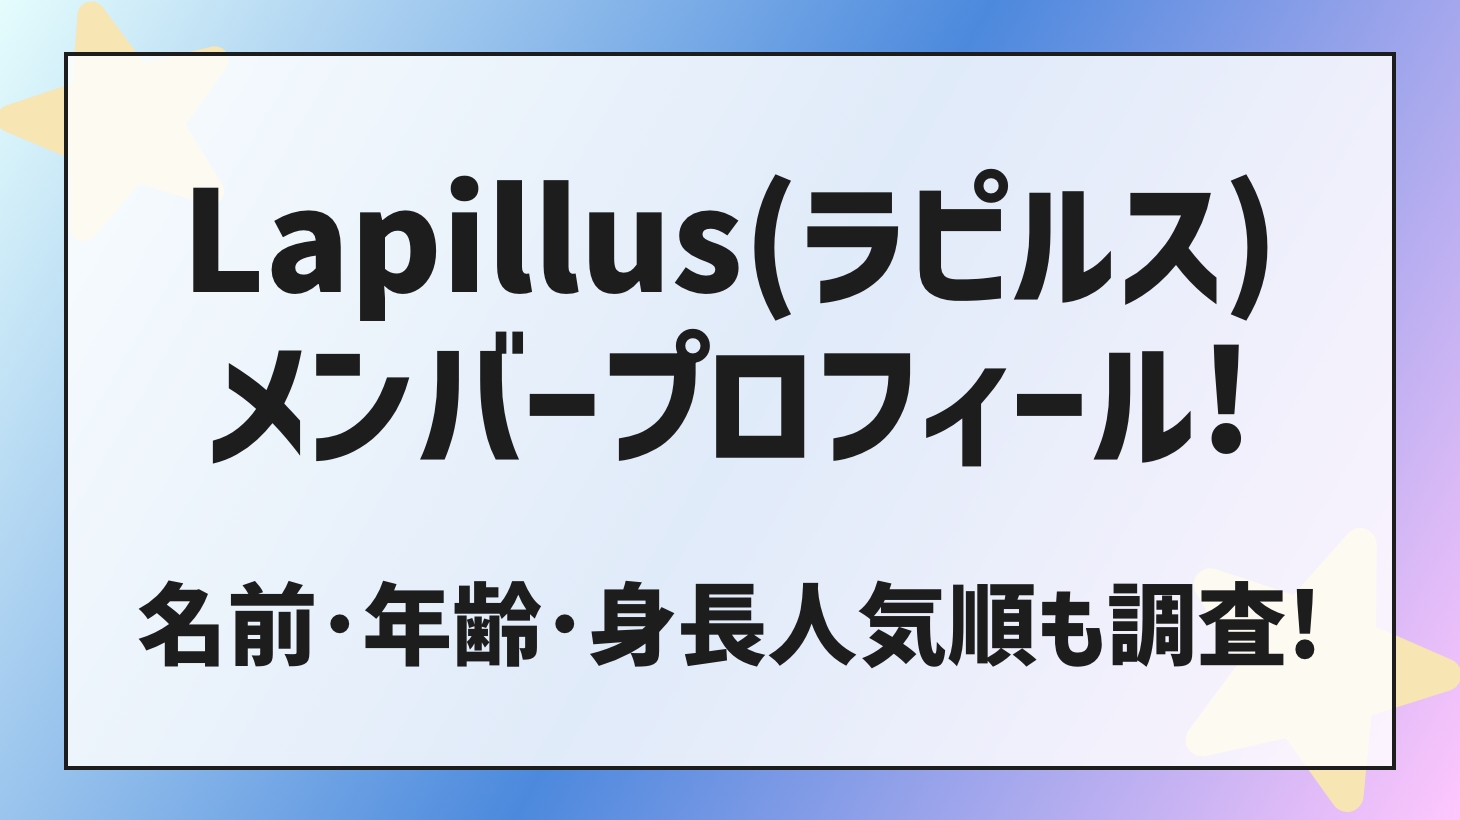 What are the names, ages and heights of Lapillus members? Fan names and popularity order!